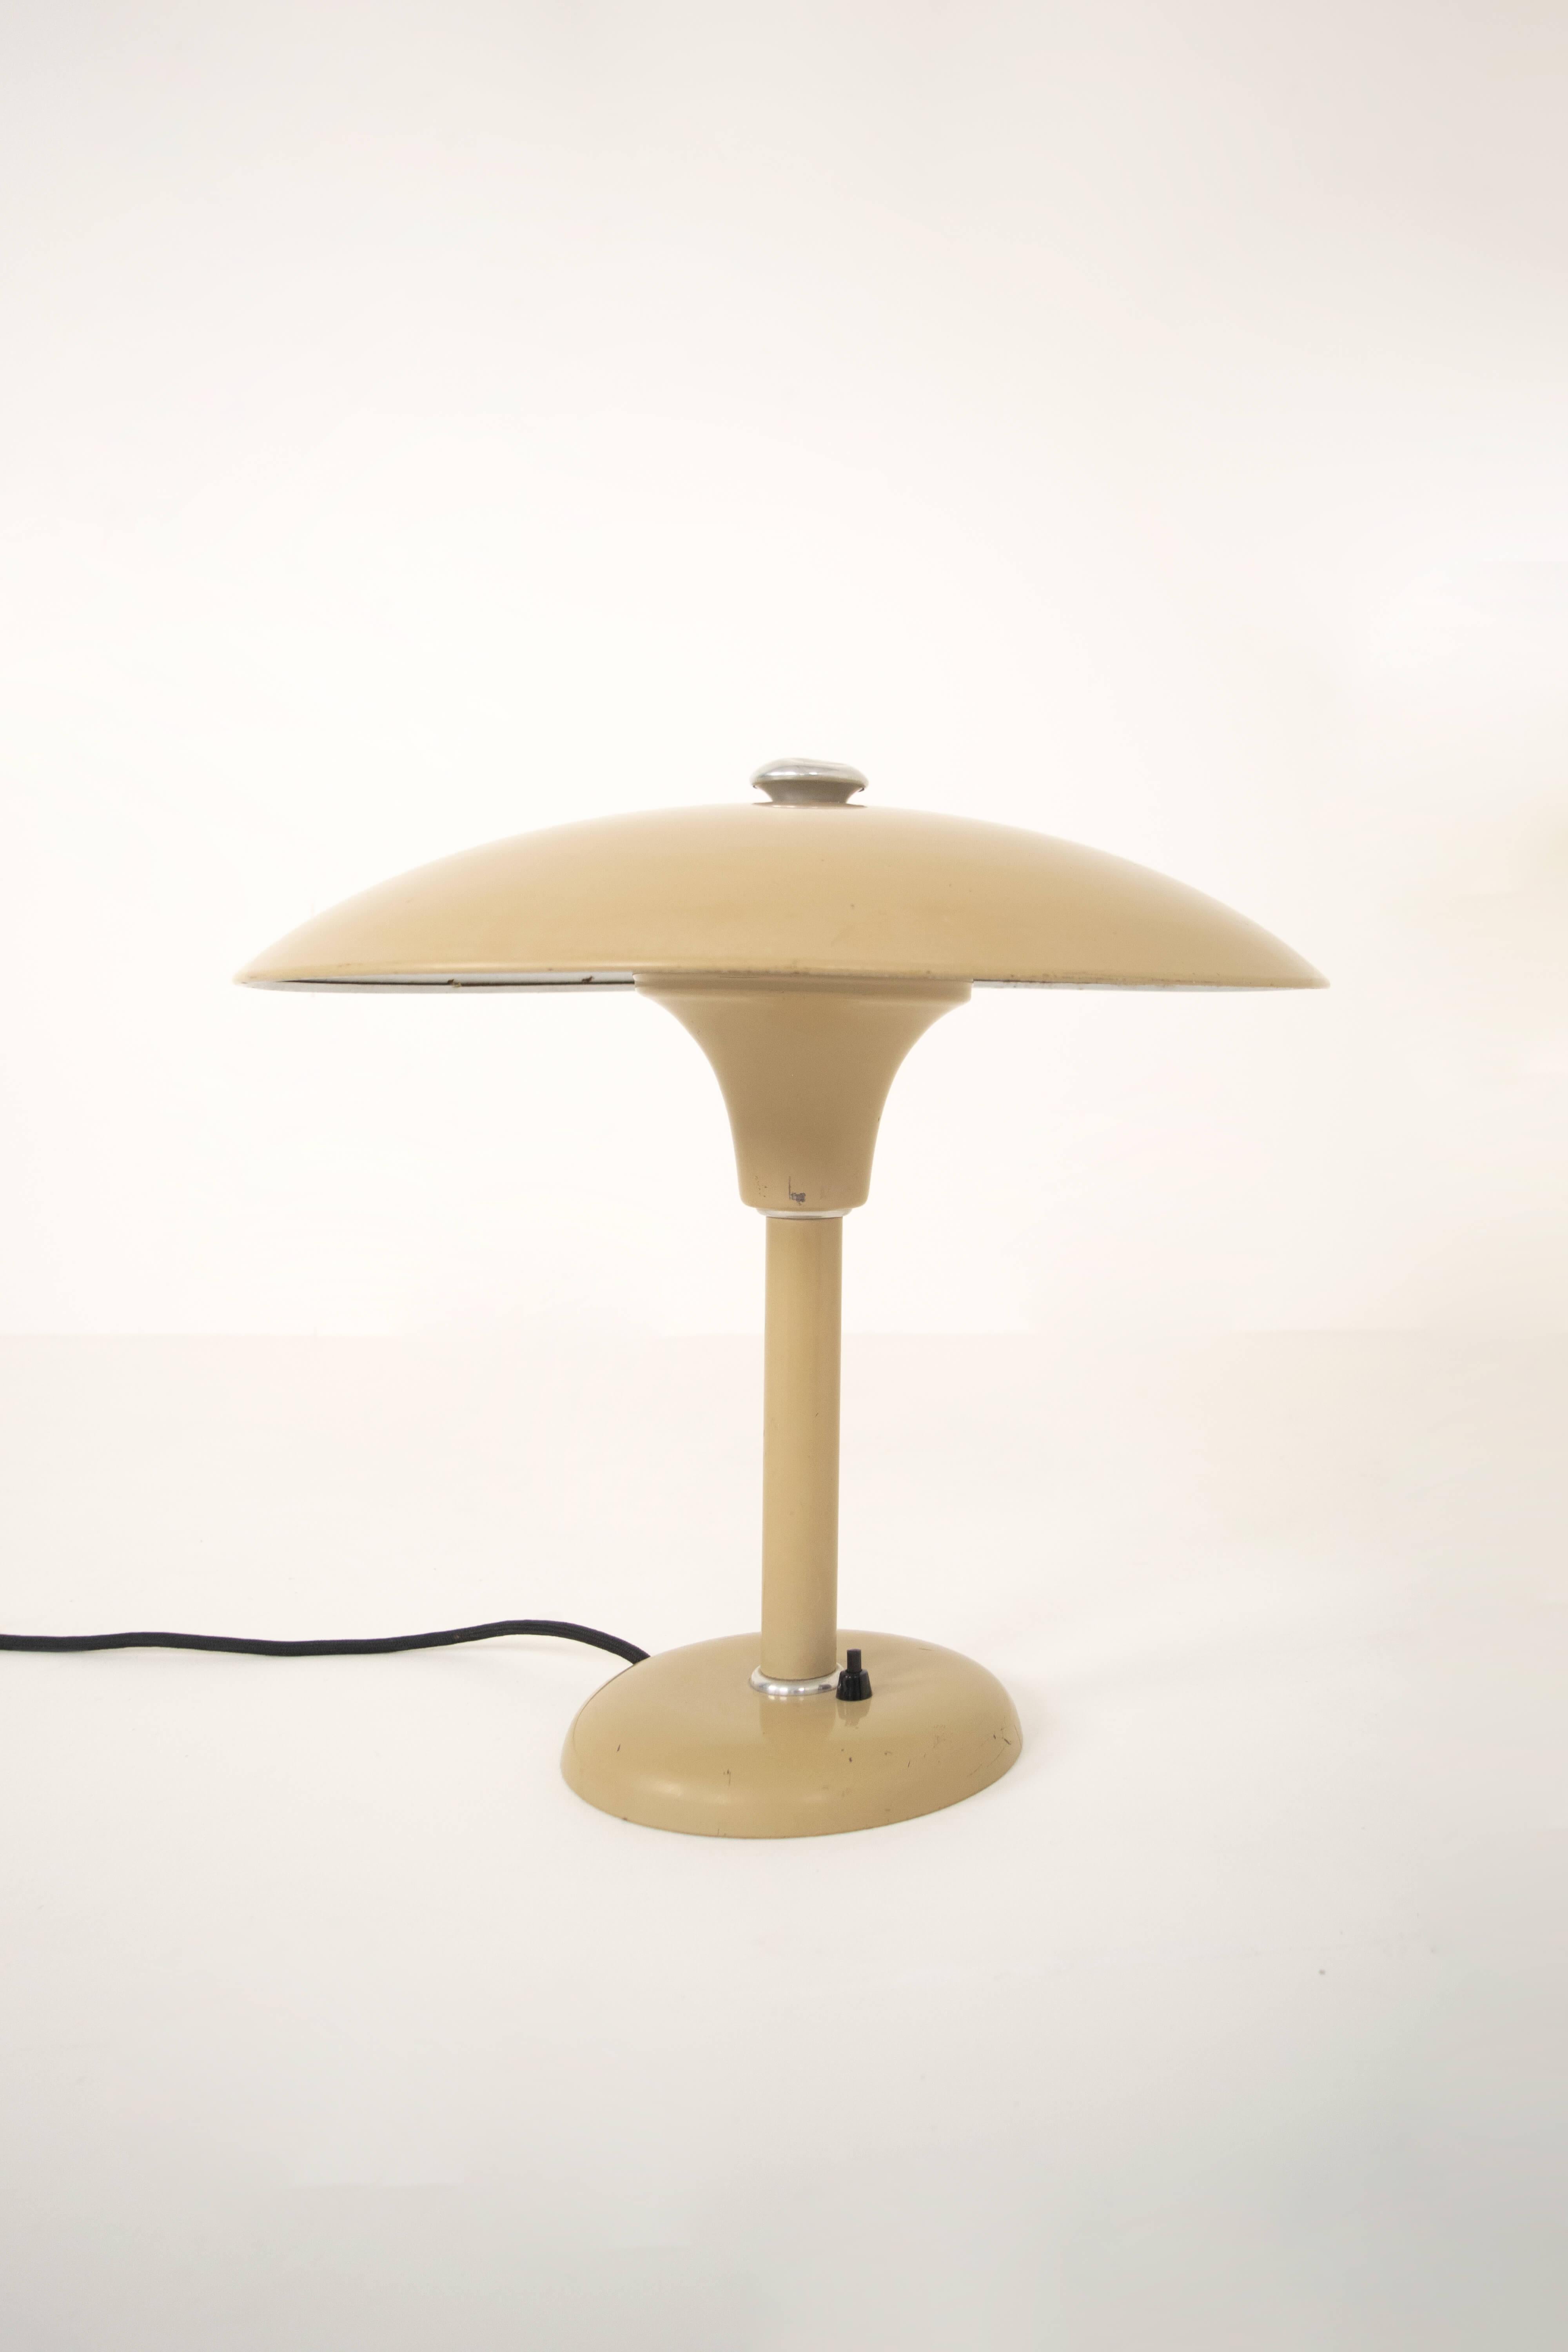 Schröder 2000 table or desk lamp by Max Schumacher from Germany. This lamp is designed by Max Schumacher in 1934 and manufactured by Werner Schröder in Lobenstein. This lamp is truly in the Bauhaus style and has a very clean and functional design.